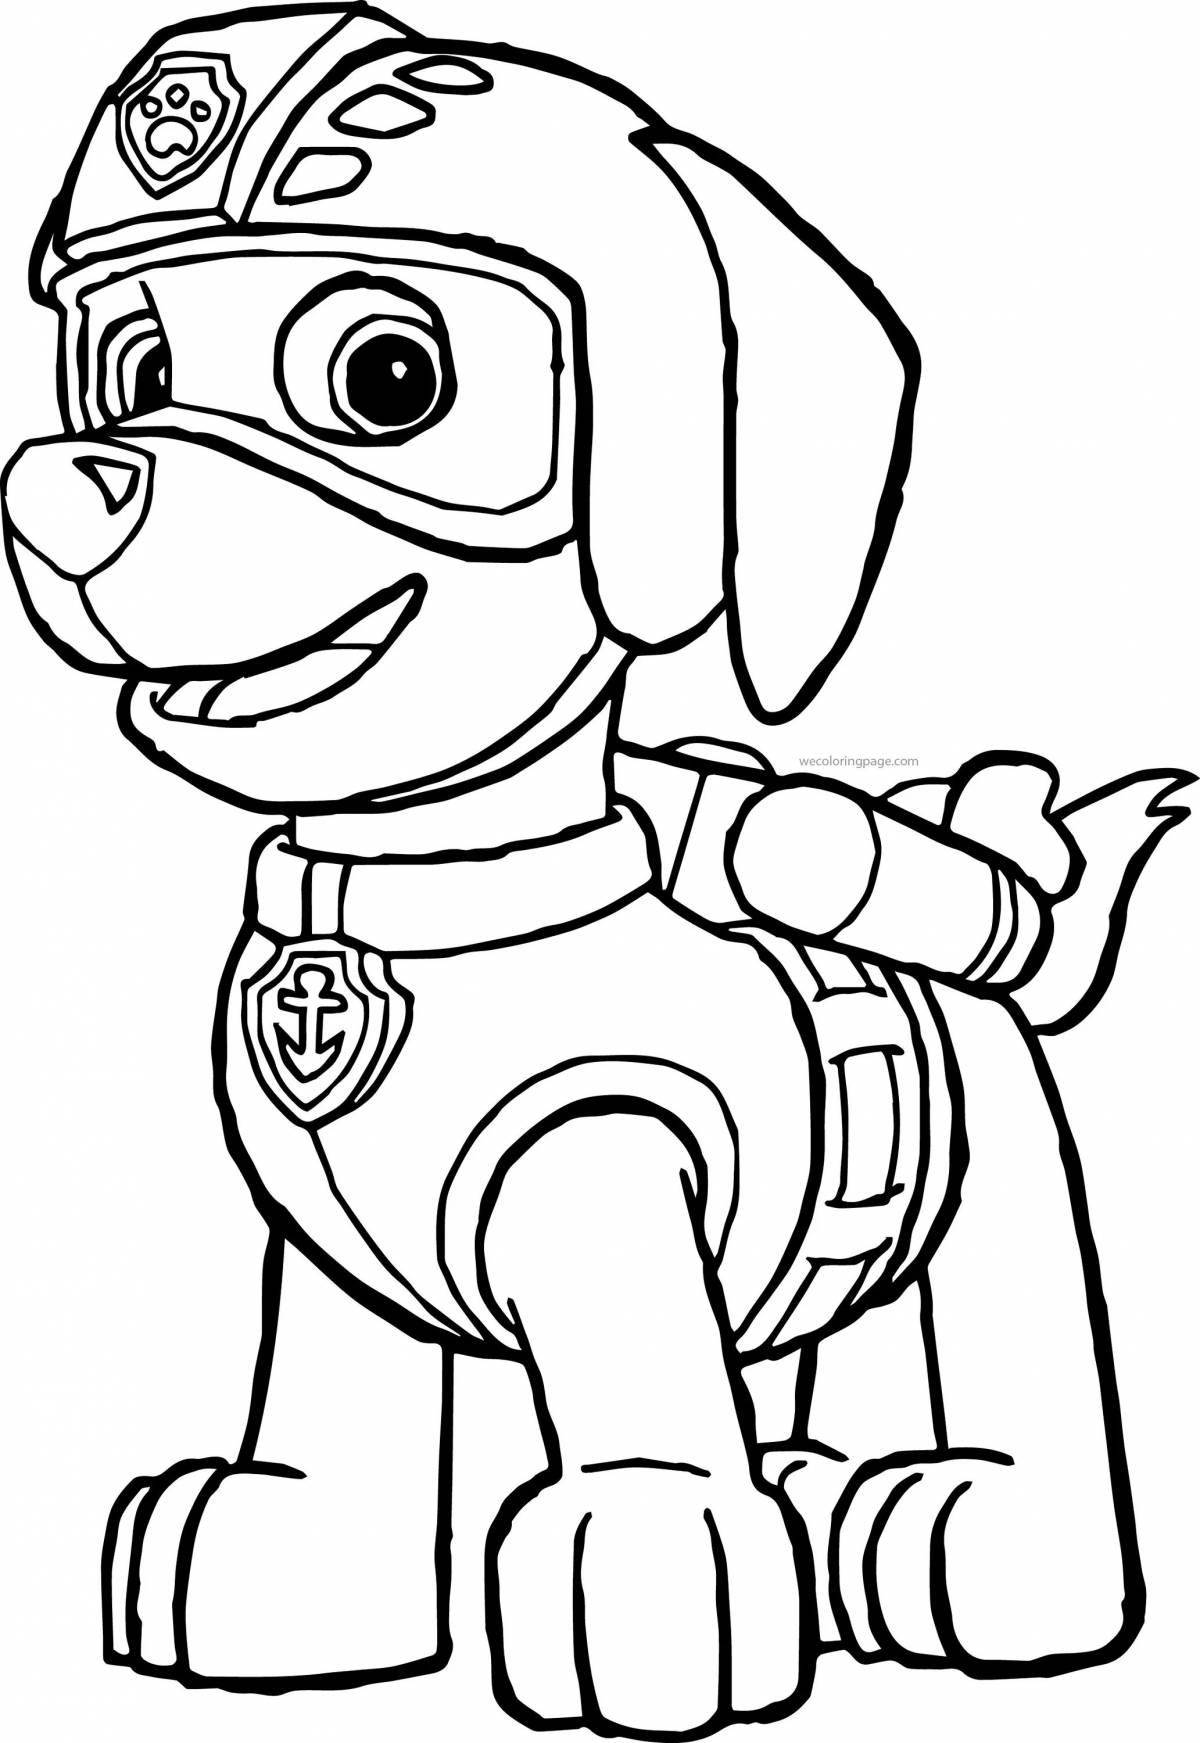 Creative paw patrol coloring book for kids